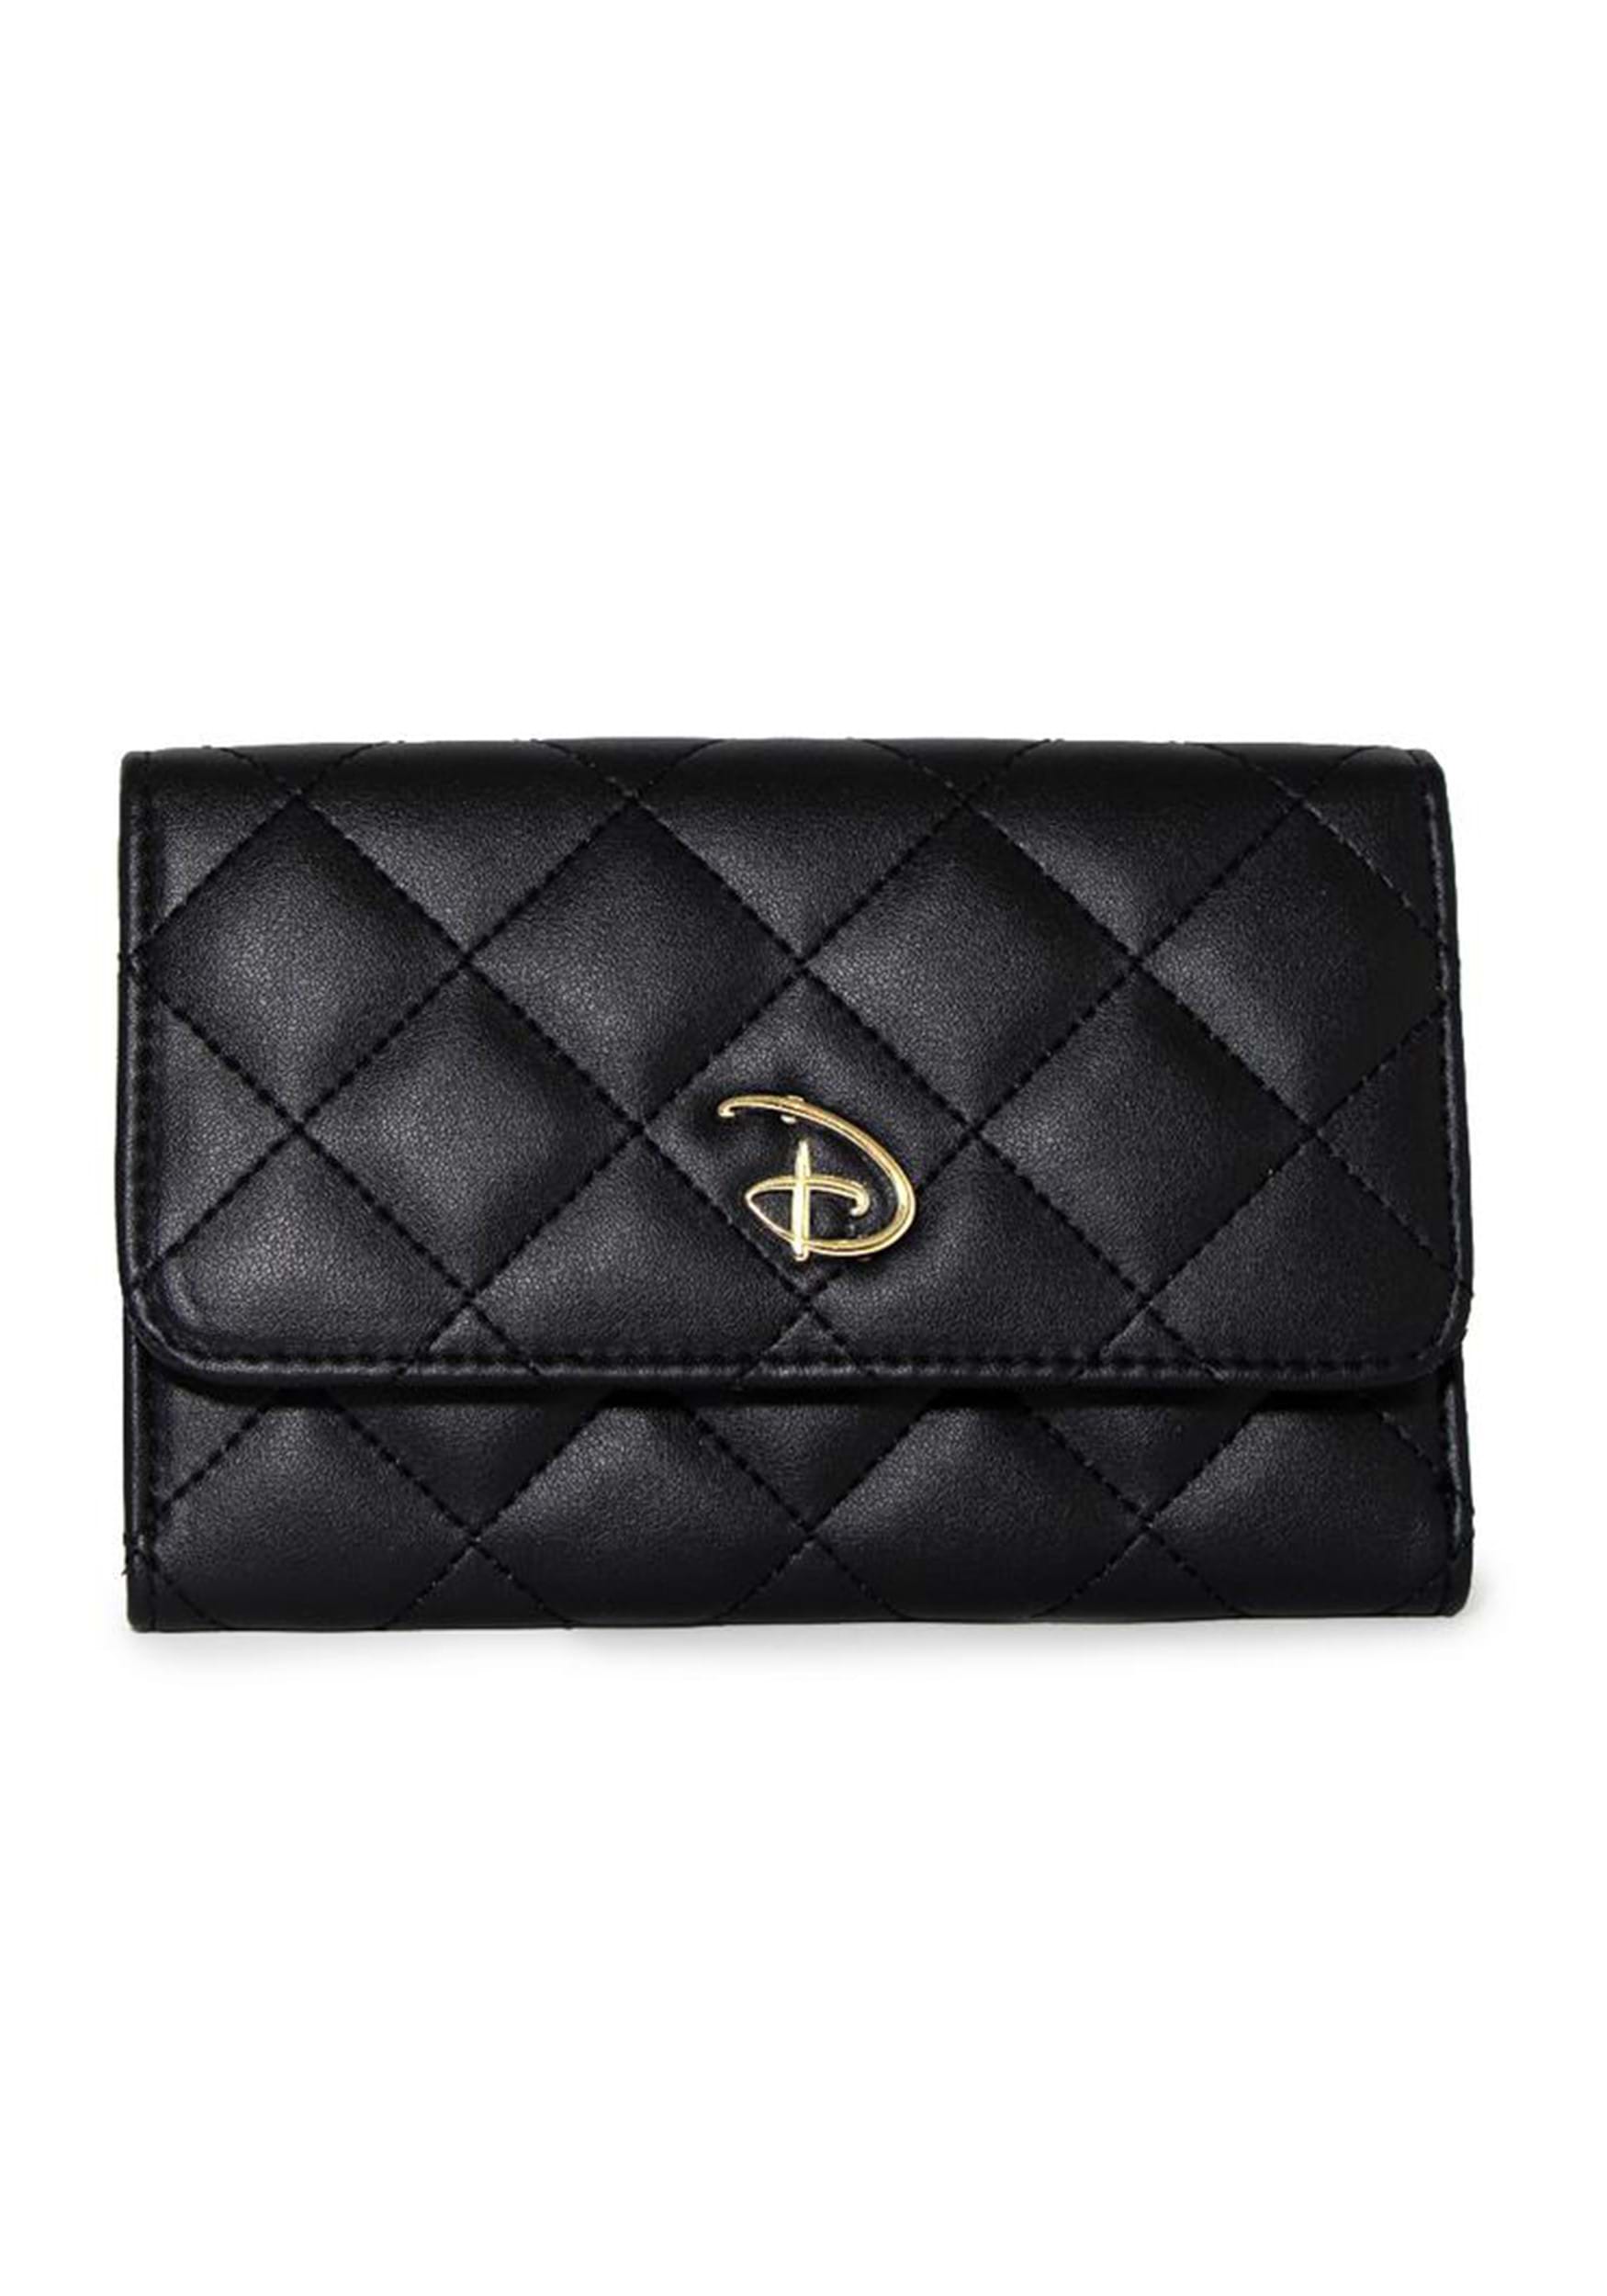 Disney Wallet with Gold Accent